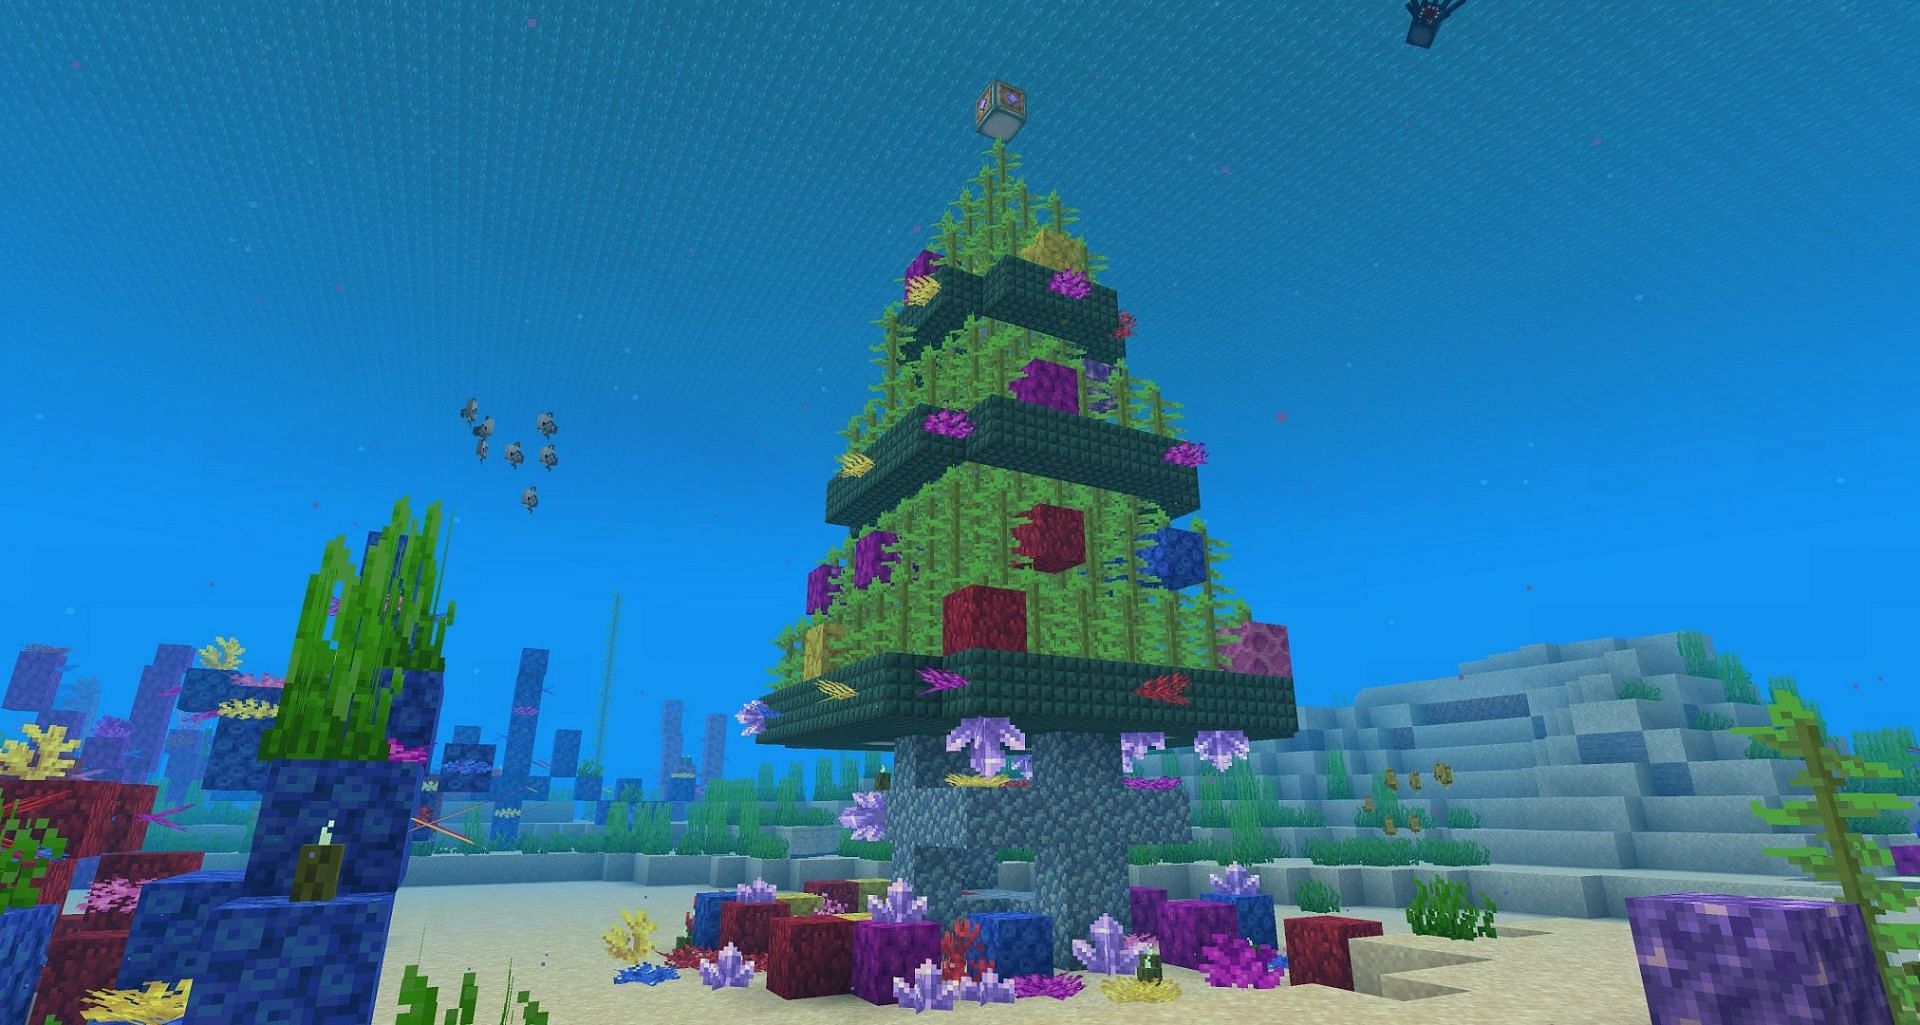 This underwater tree is perfect for festivities (Image via Play3r_Zer0/Reddit)